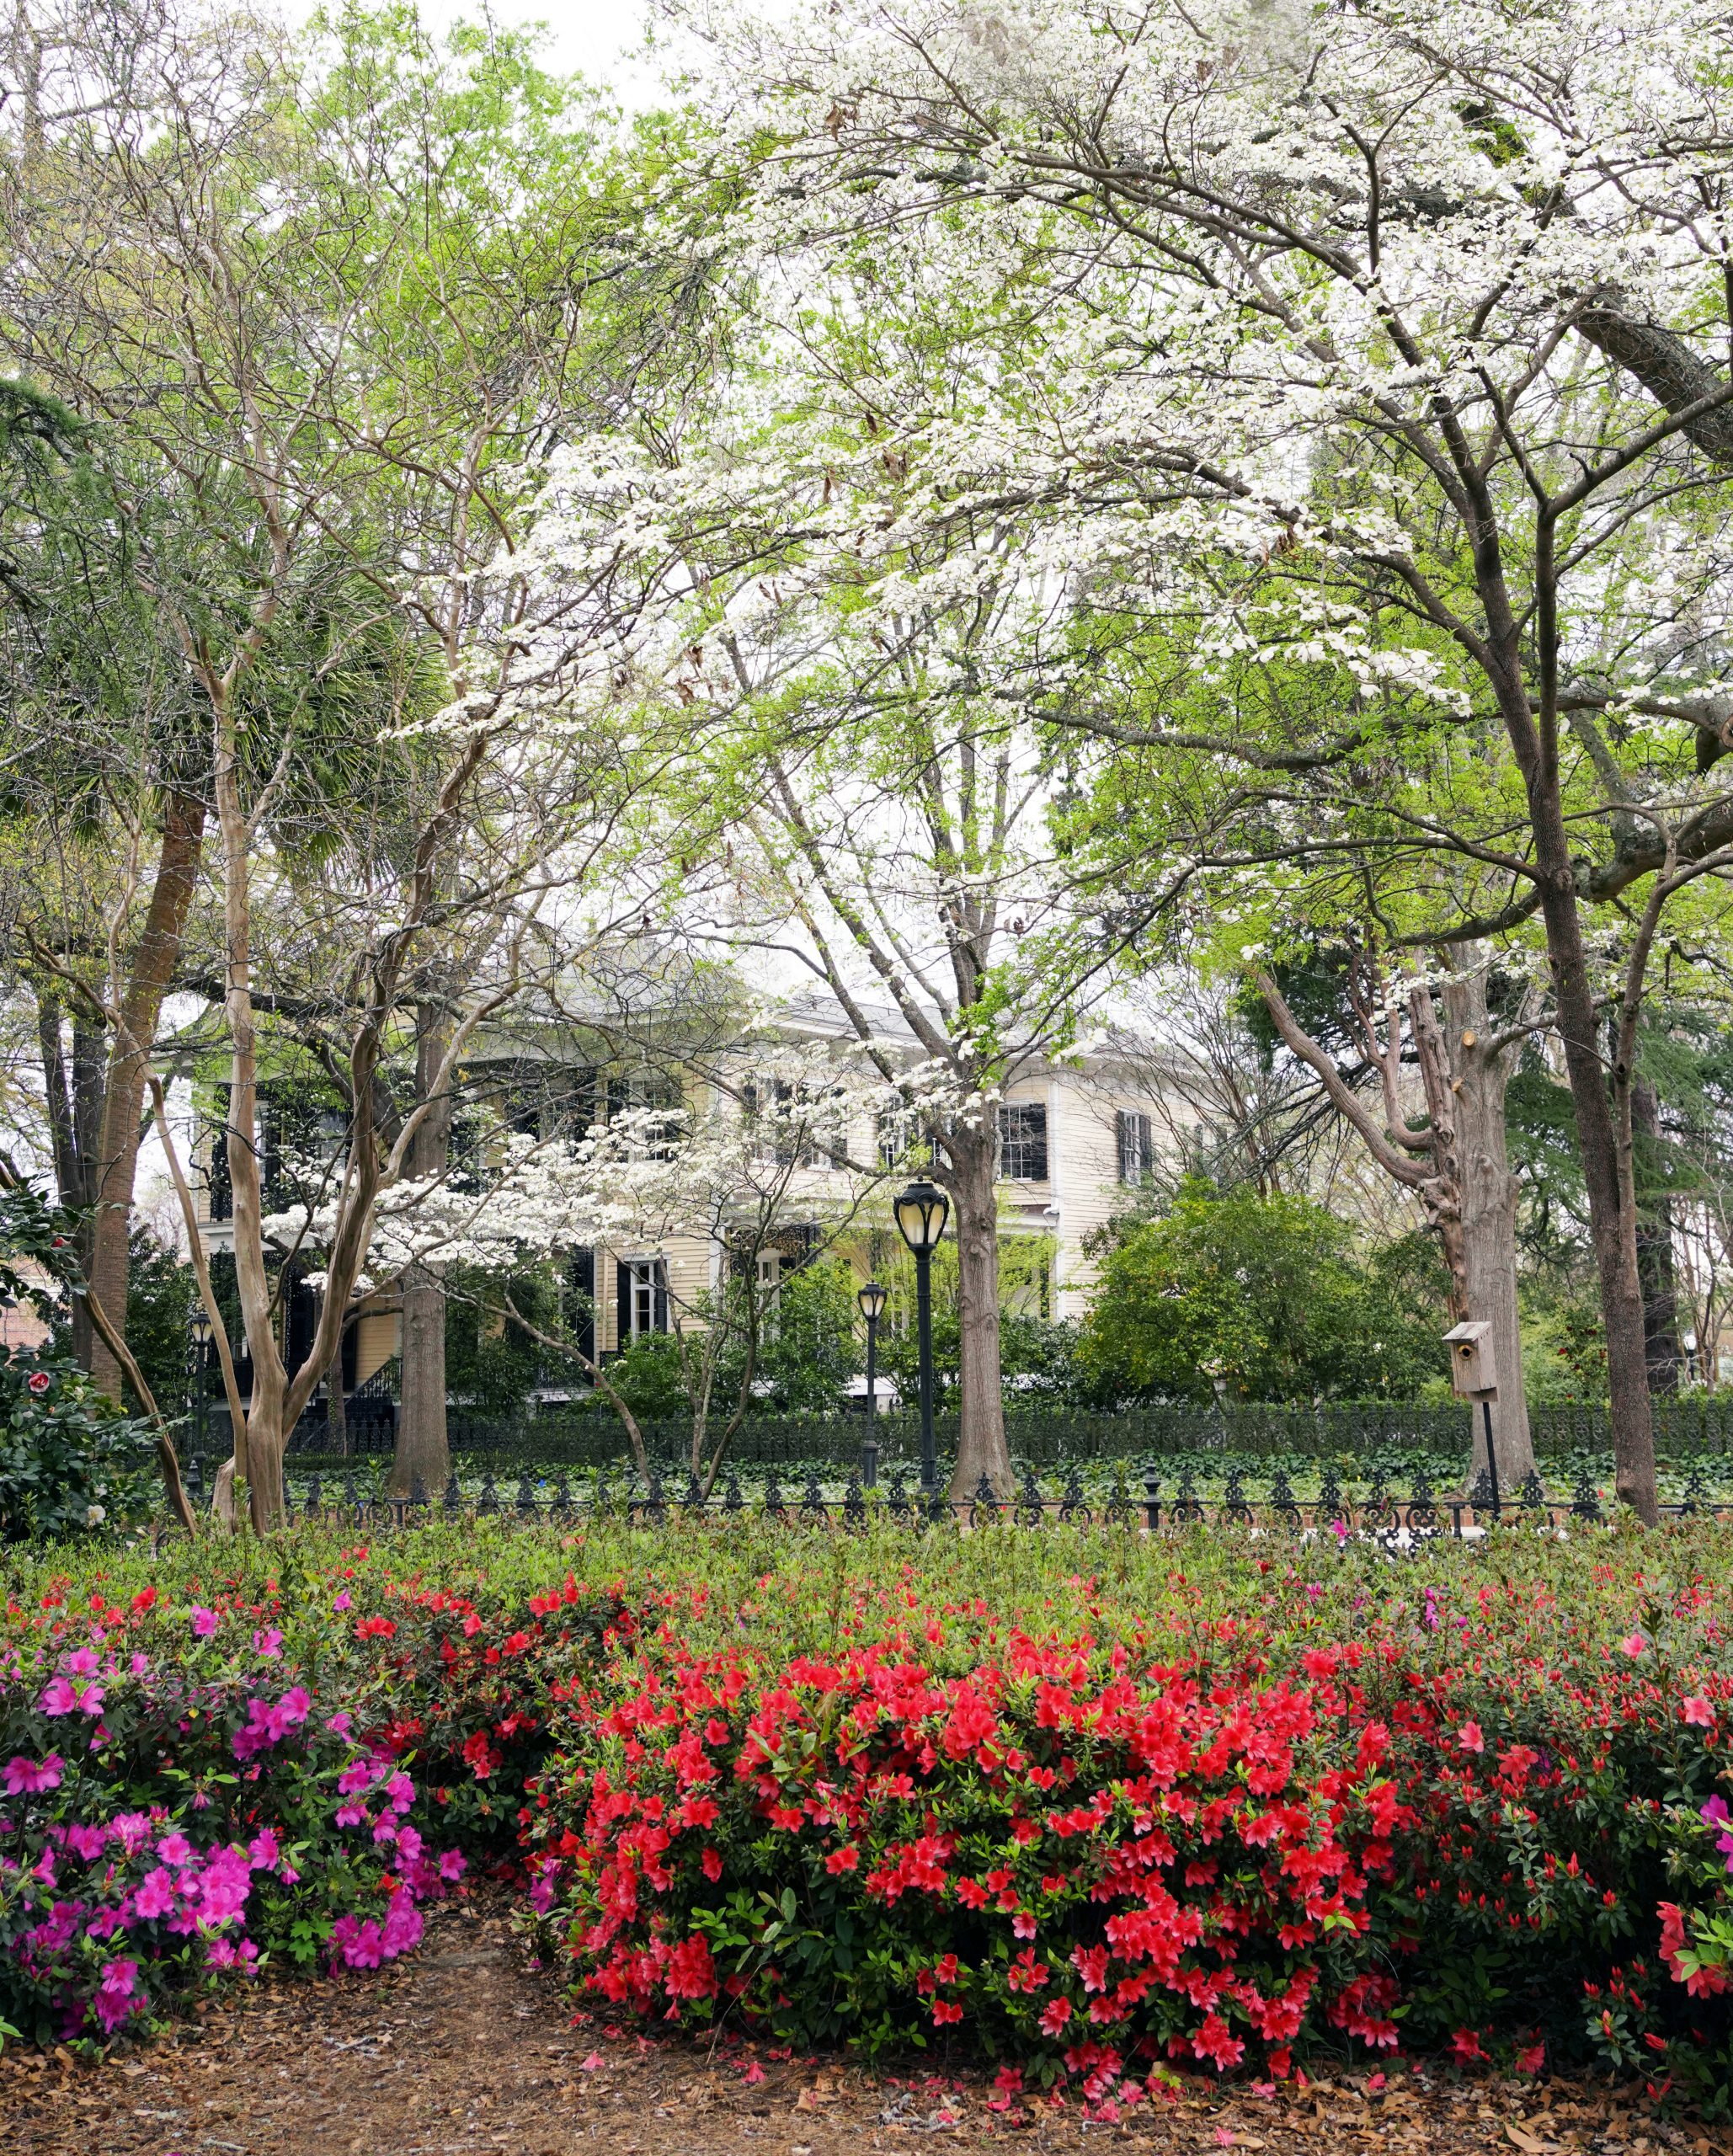 A view from the mansion gardens with azaleas and dogwoods shows the Lace House, one of the historic homes located on Arsenal Hill.
